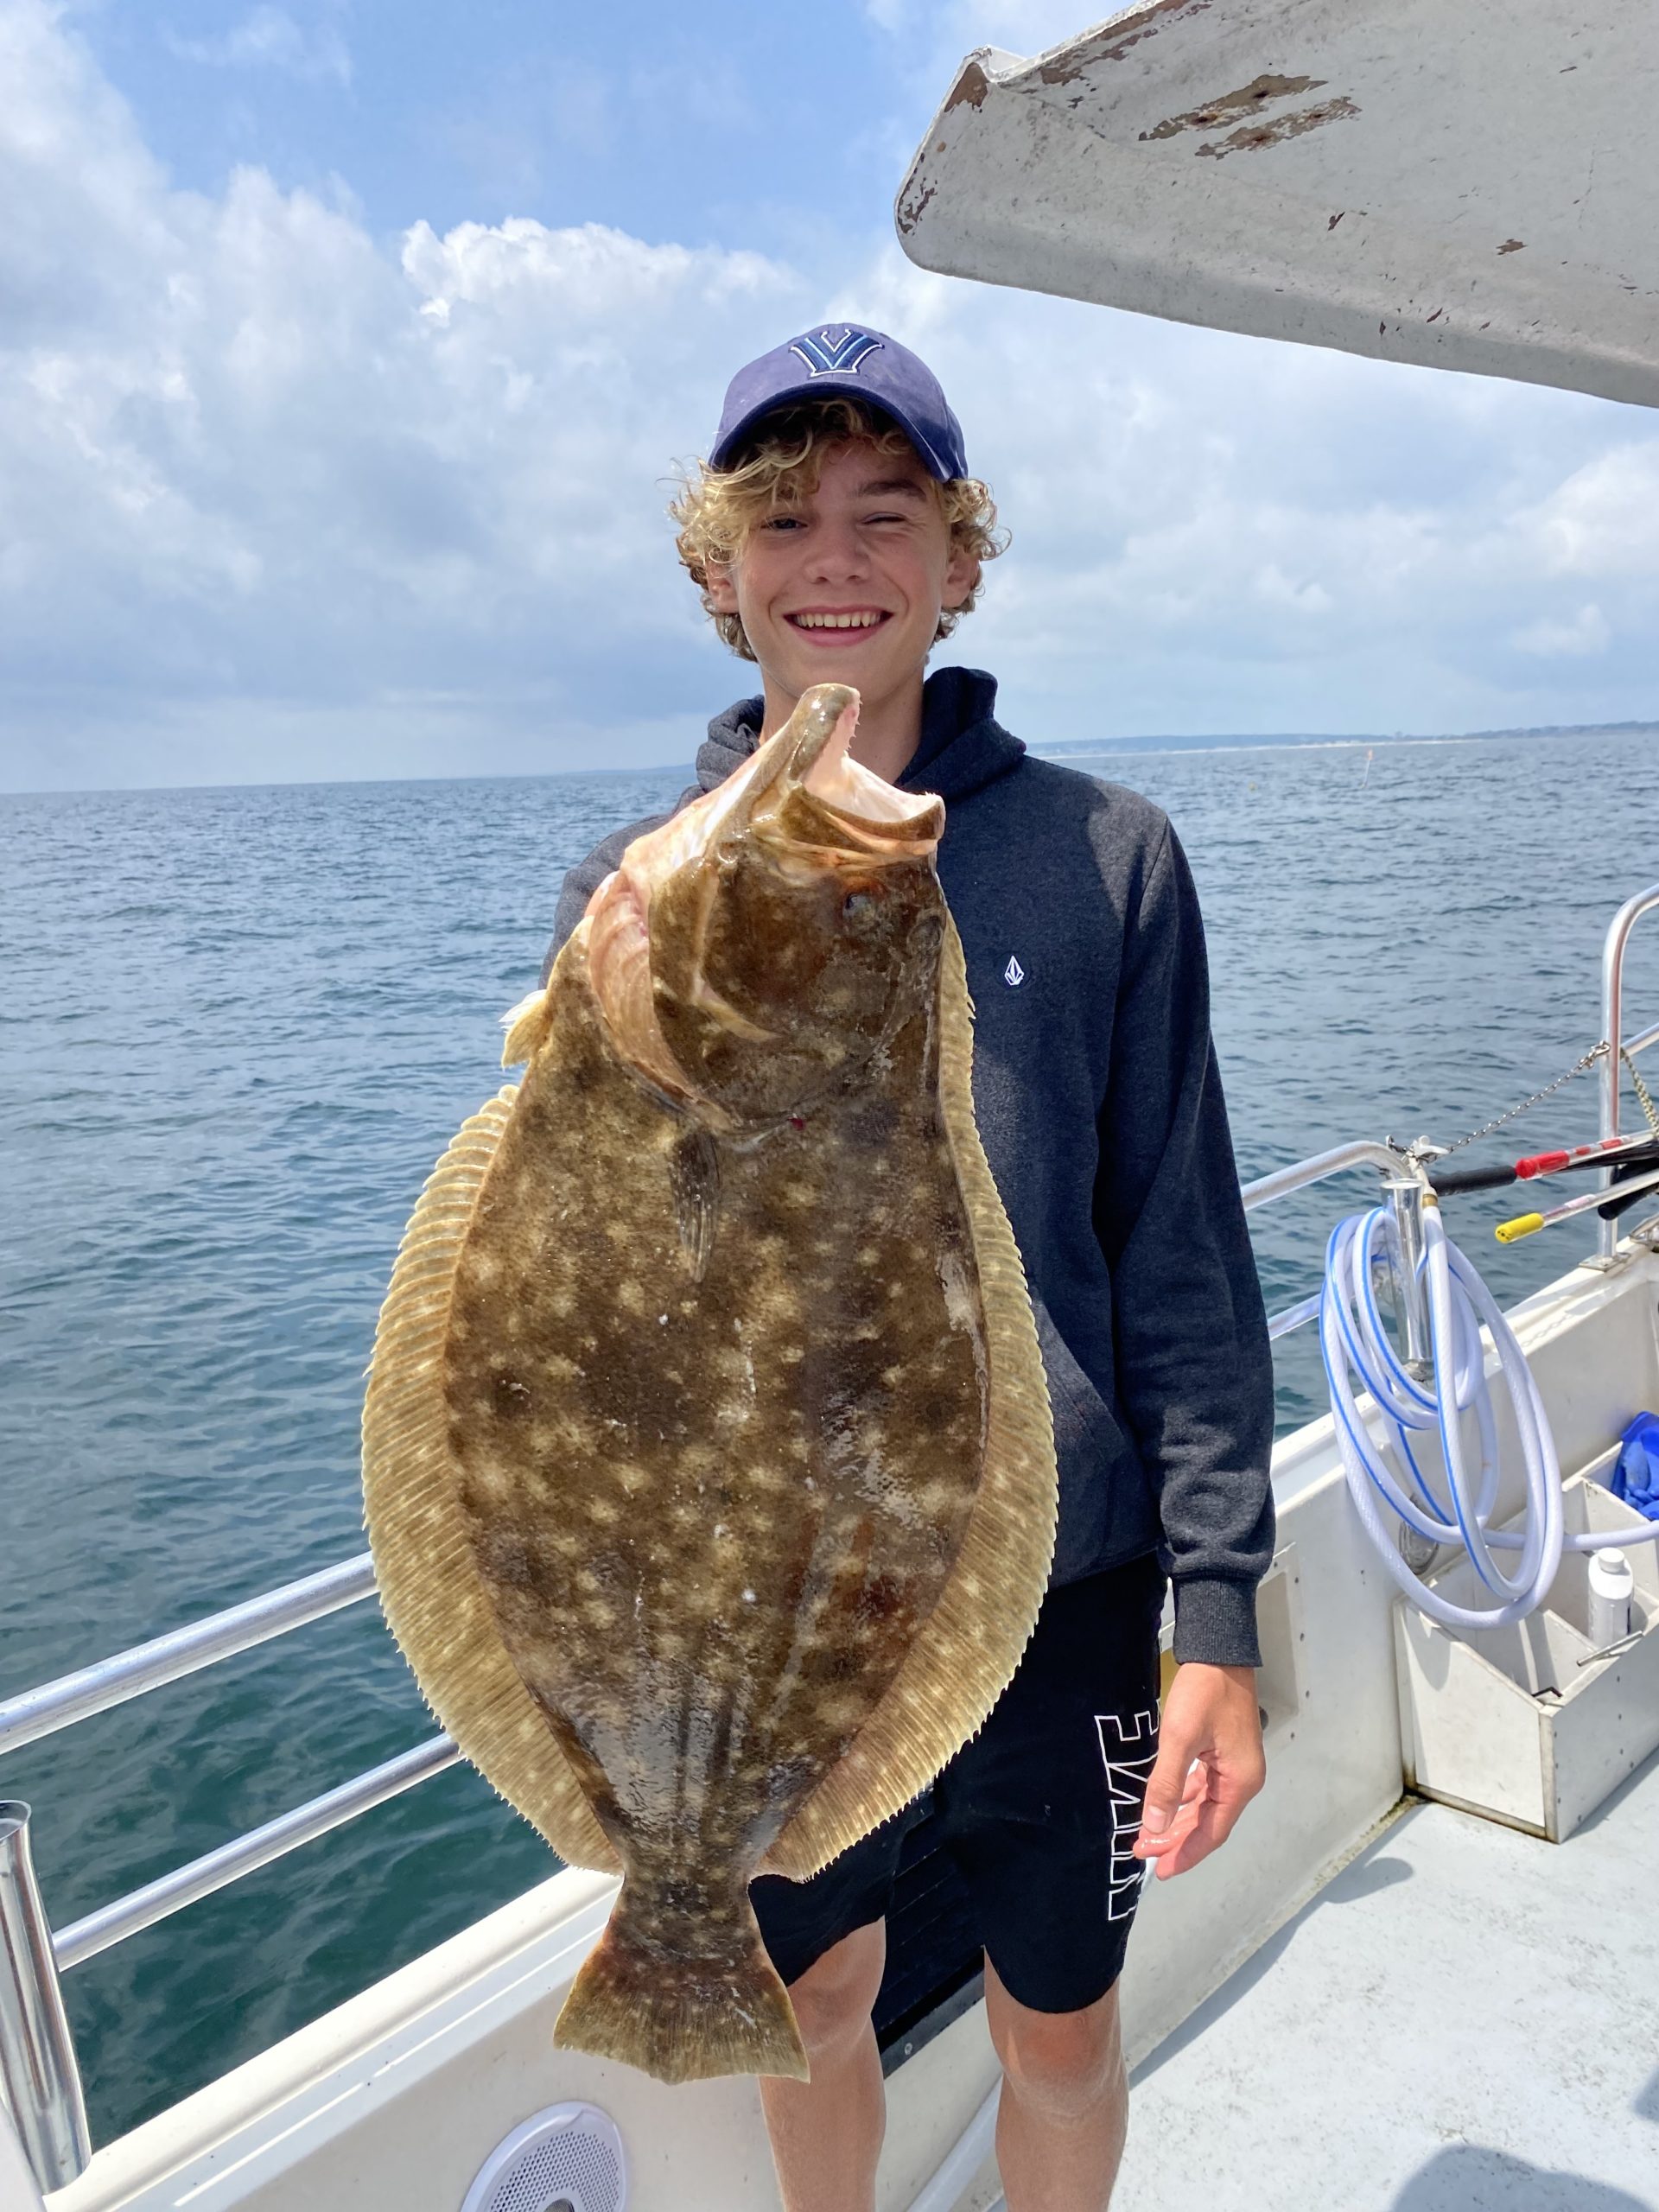 Luke Horrigan decked this 8.5-pound fluke while fishing last week aboard the Montauk charter boat Double D out of Westlake Fishing Lodge.